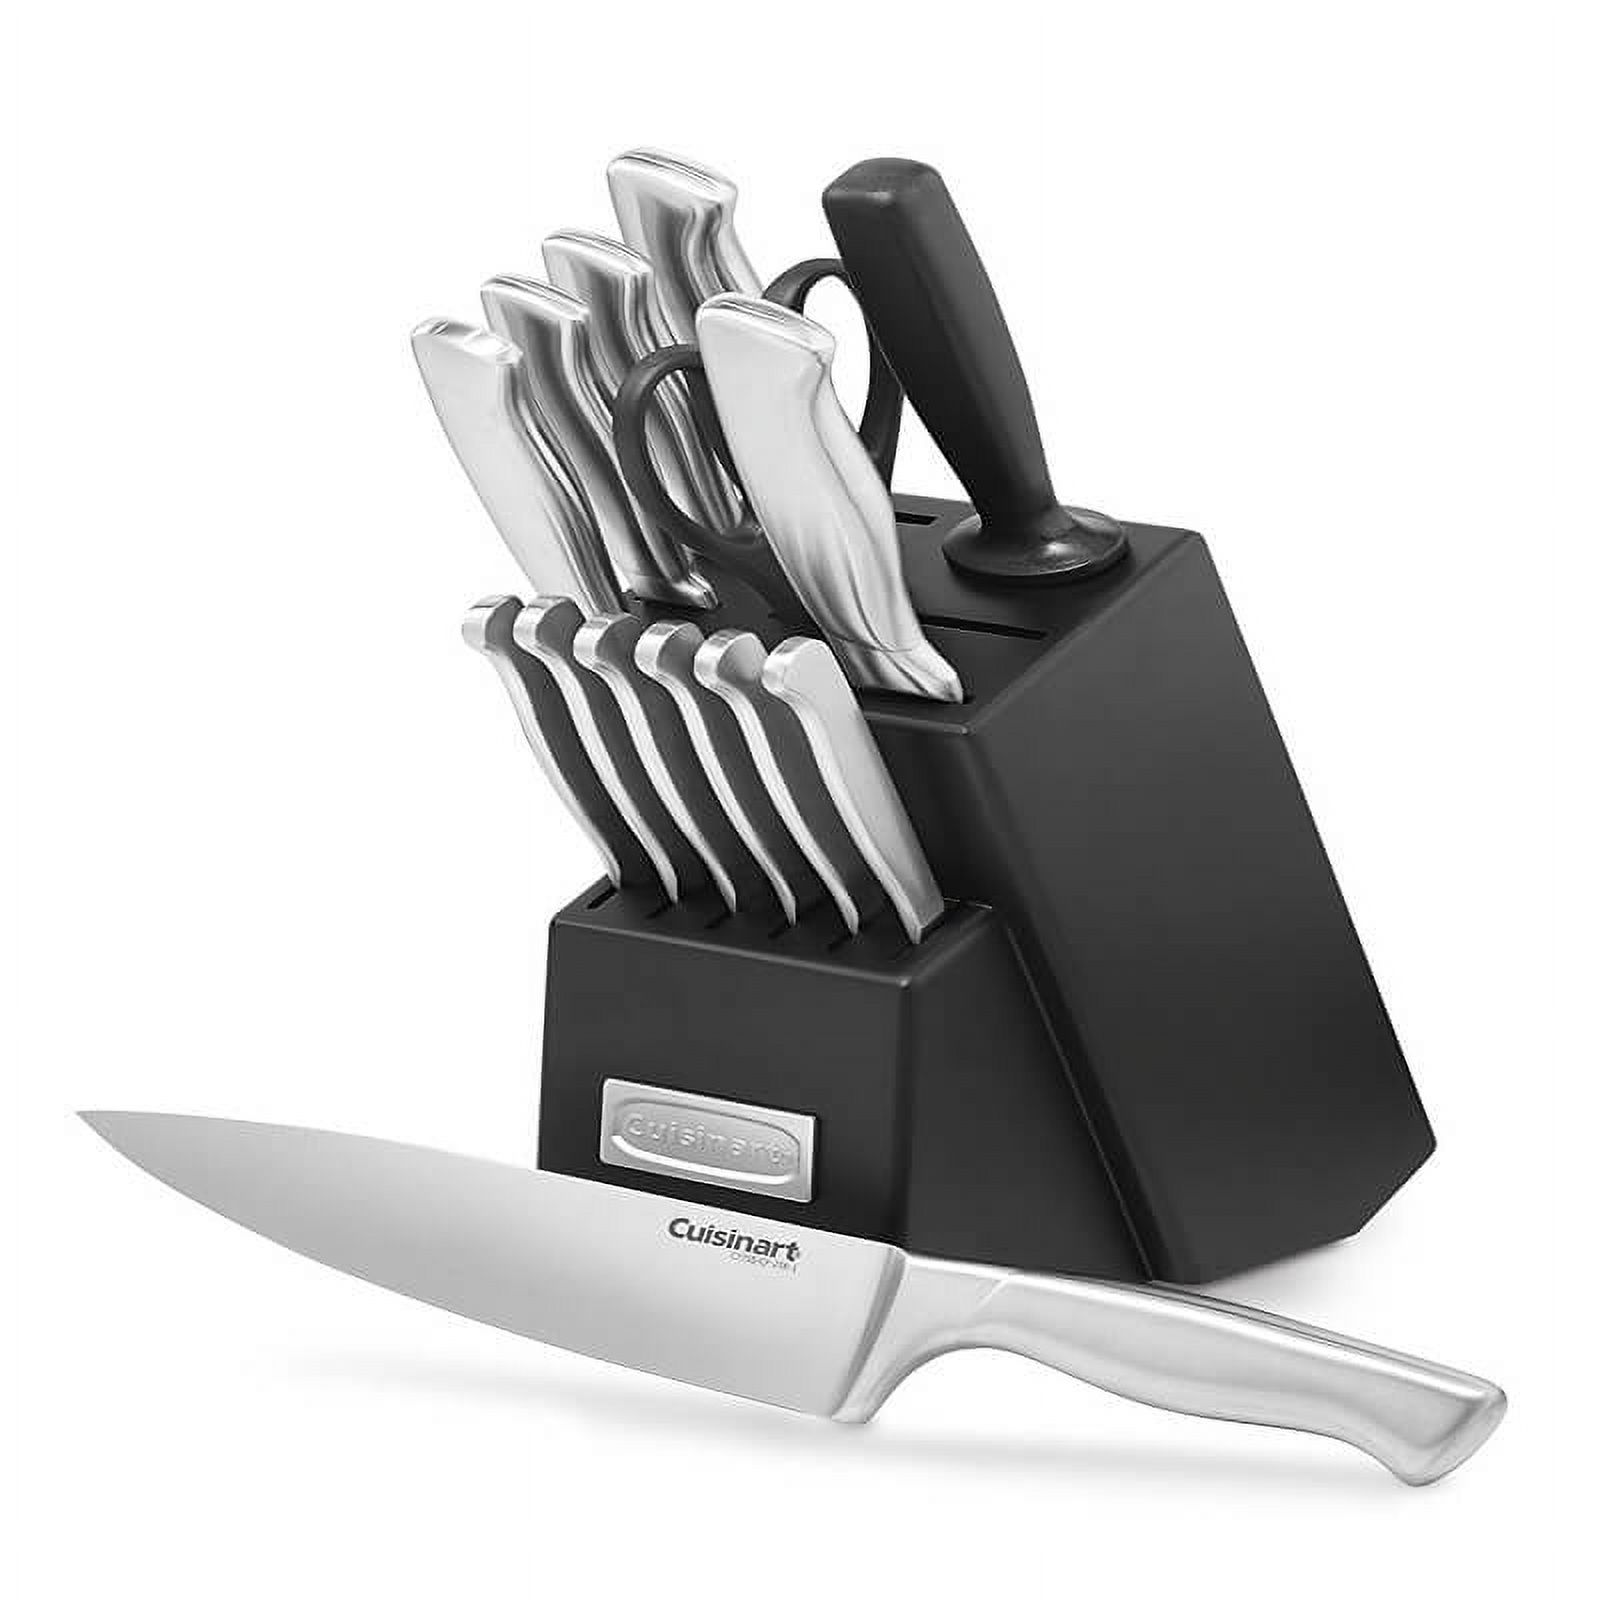 Cuisinart 15pc Stainless Steel Hollow Handle Cutlery Block Set - image 2 of 2